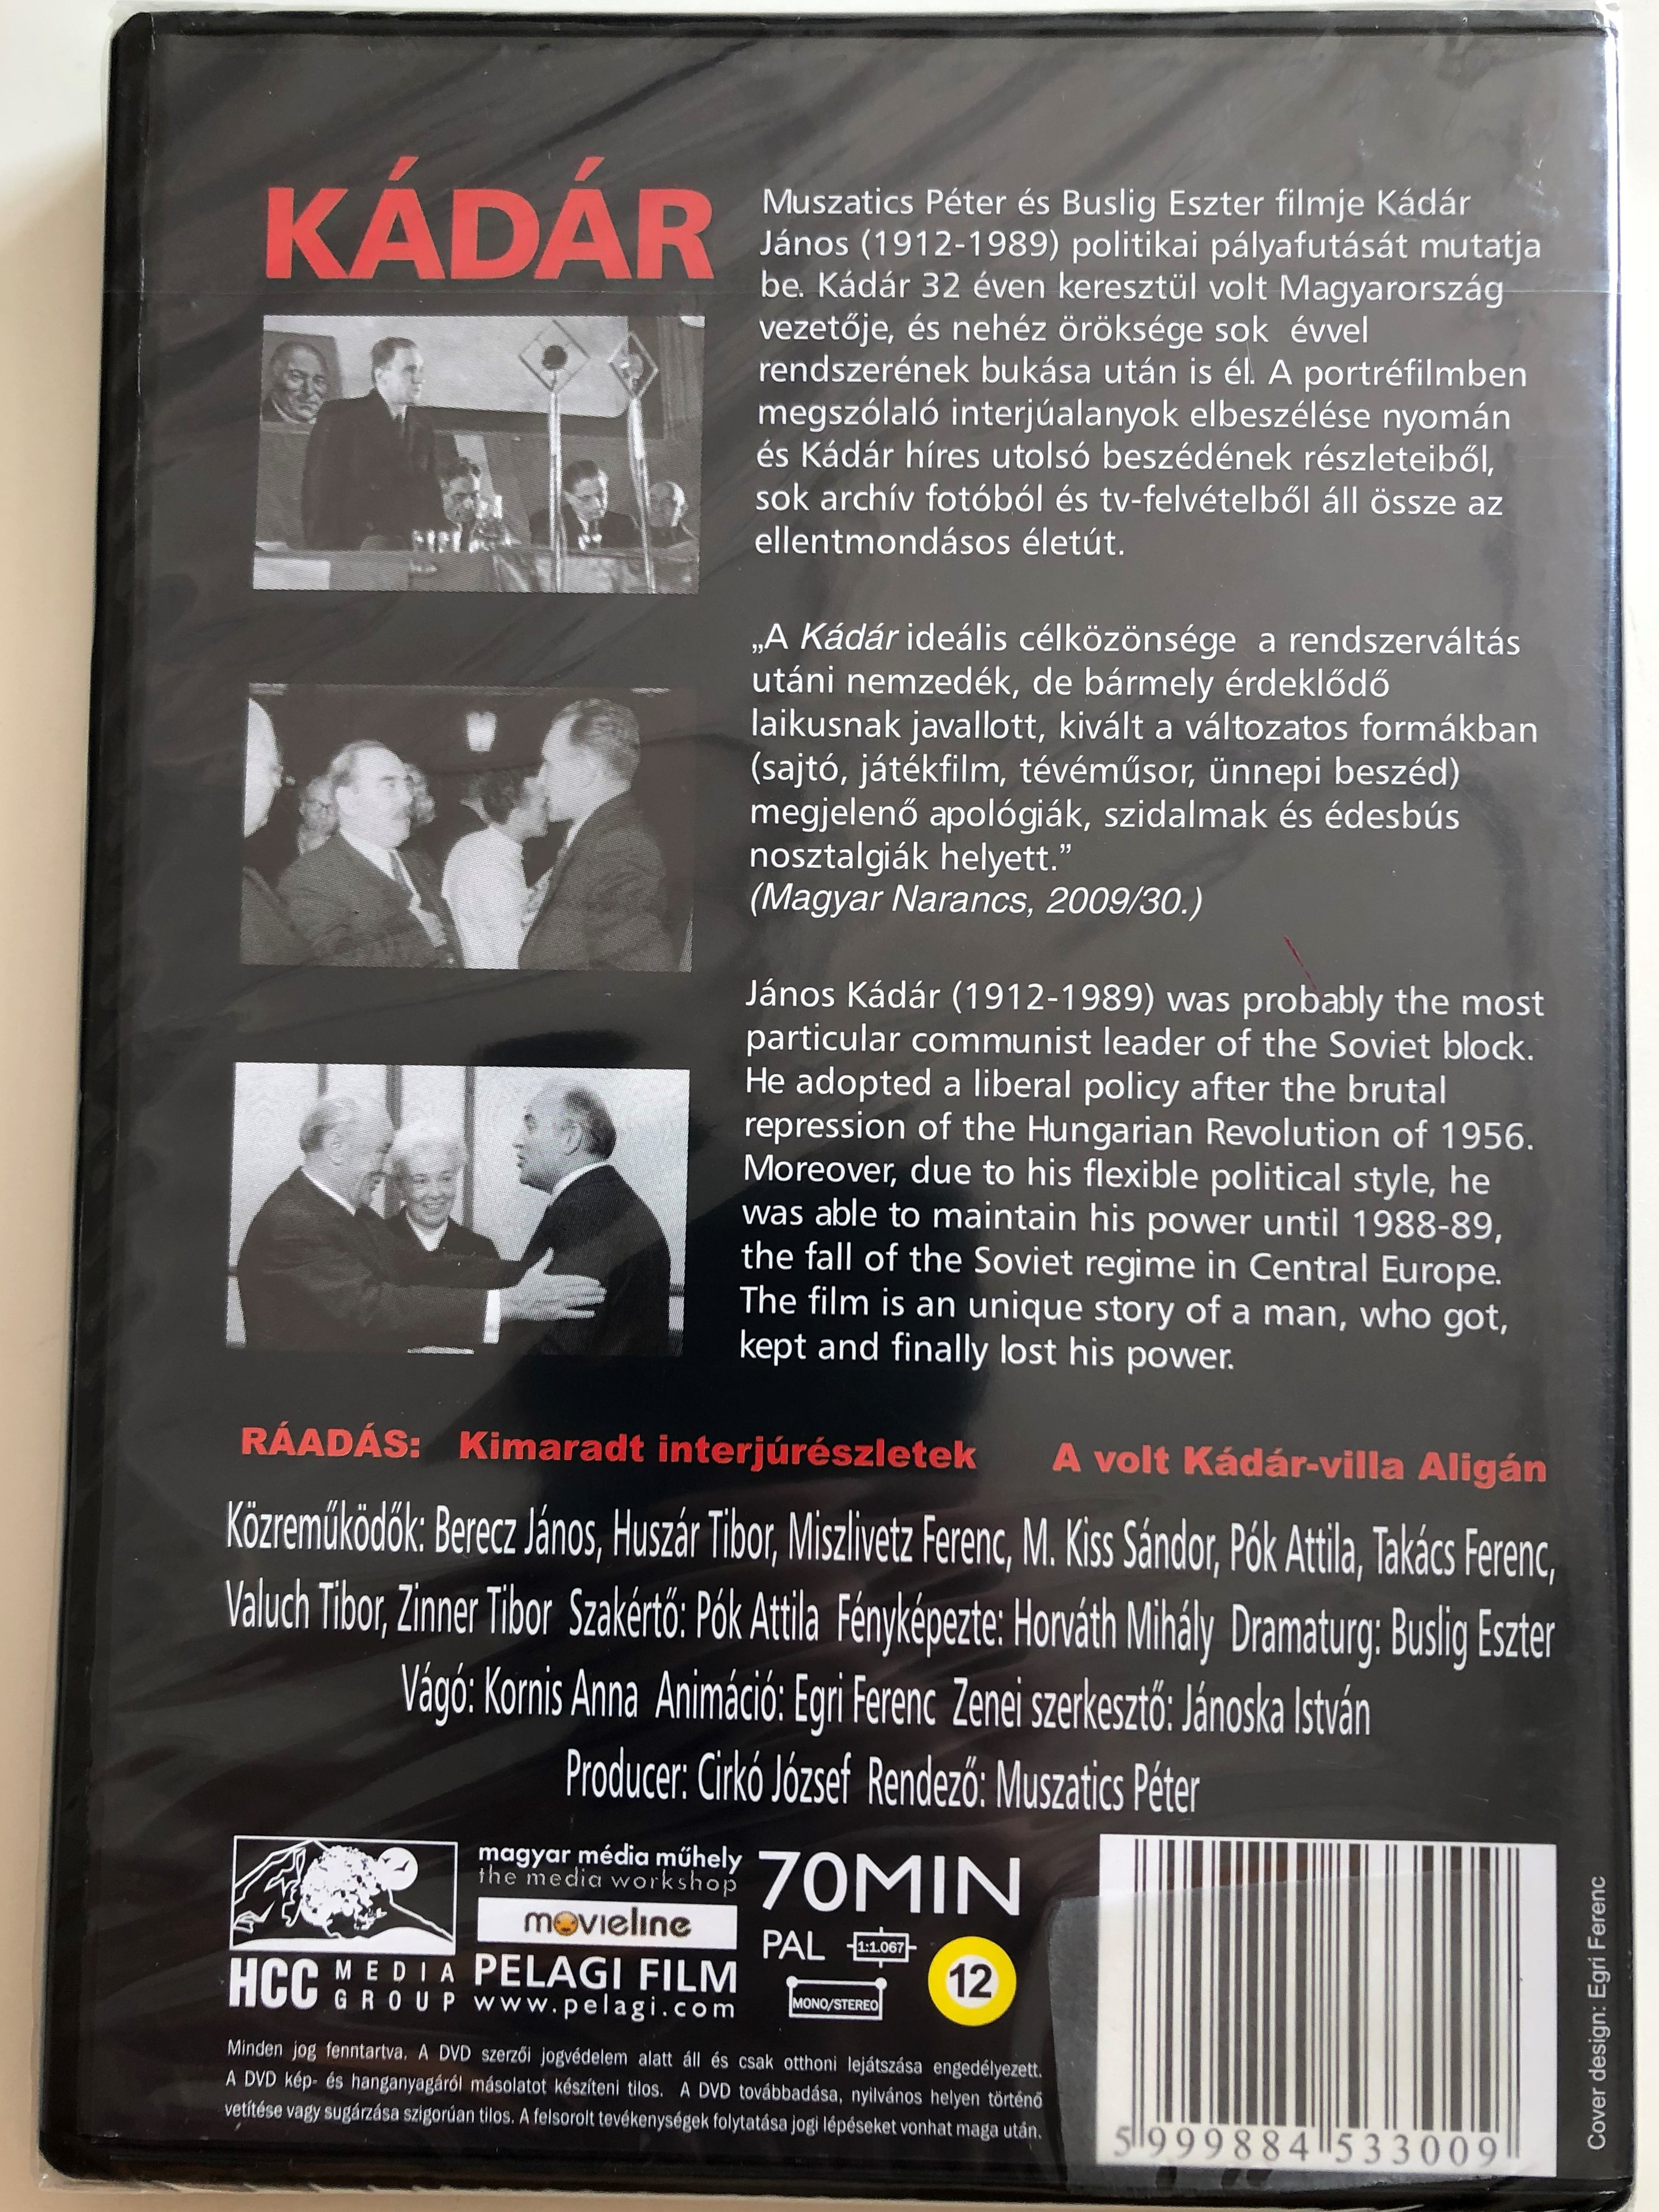 k-d-r-dvd-2009-directed-by-muszatics-p-ter-documentary-about-j-nos-k-d-r-the-long-time-communist-leader-of-hungary-2-.jpg